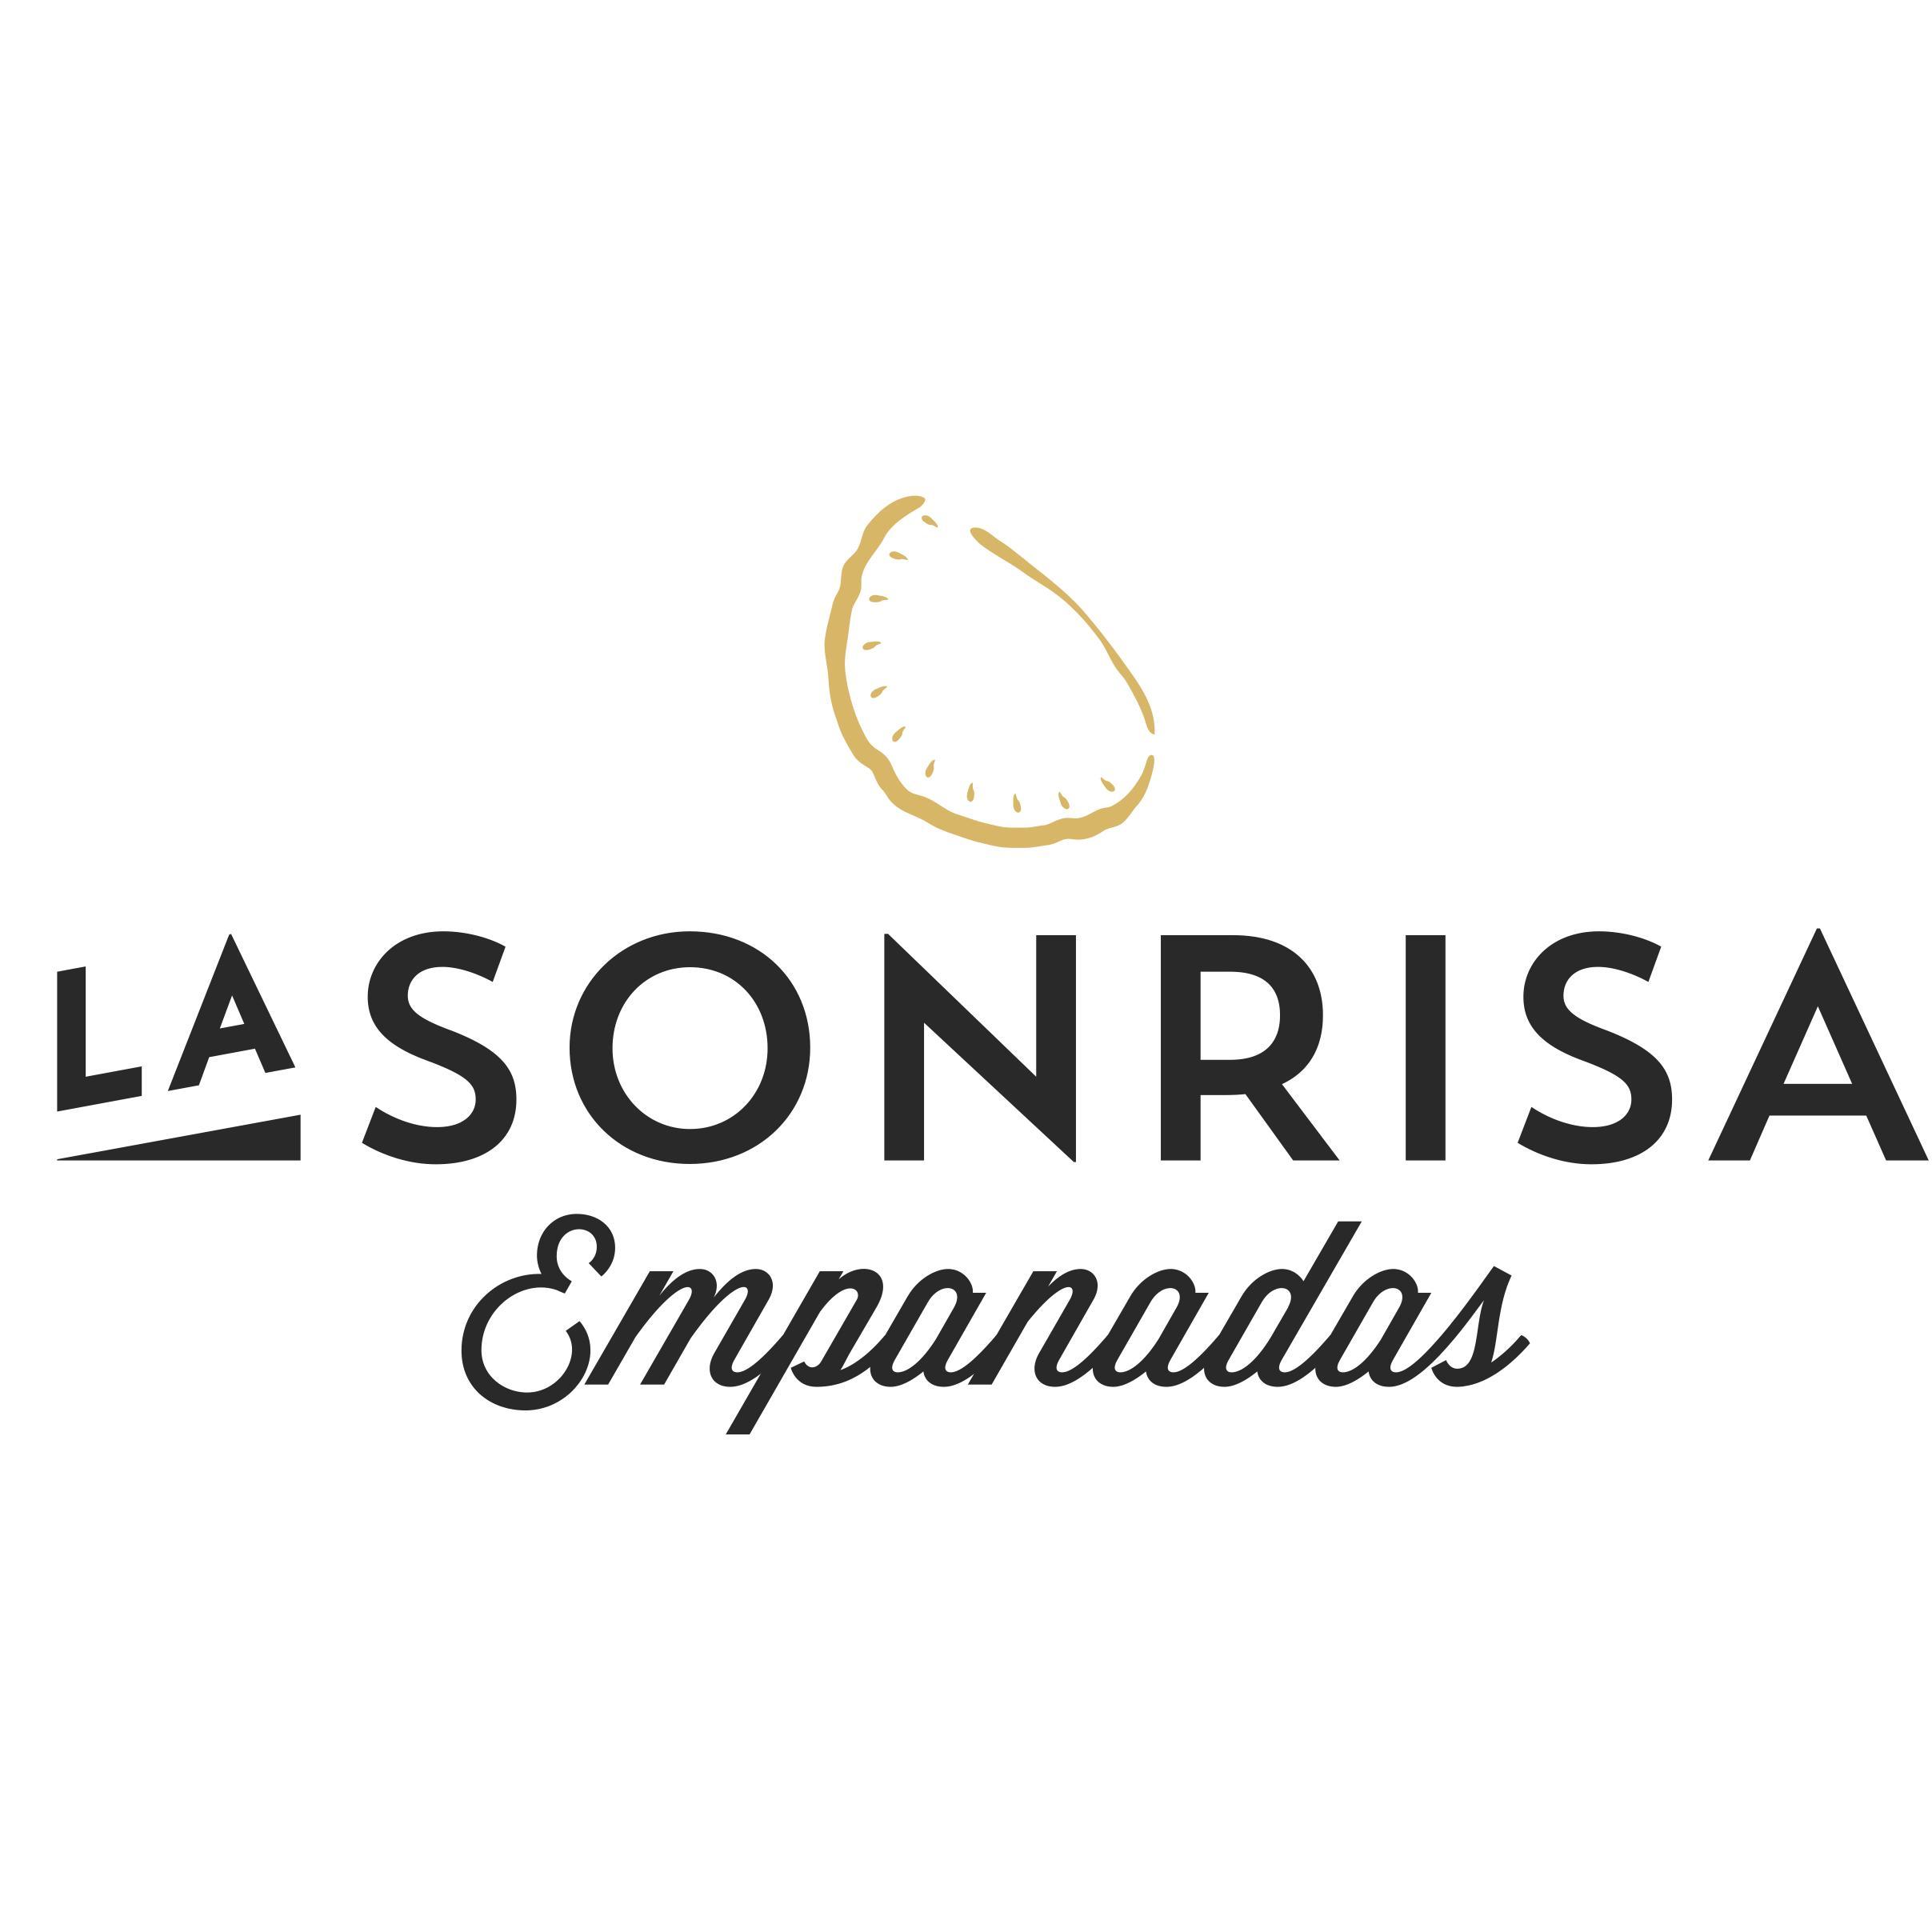 Follow us for updates & location info. Find us everyday at the @highlinenyc (16th Street Passage) from 10AM-9PM E-mail: info@lasonrisafoods.com #lasonrisafoods